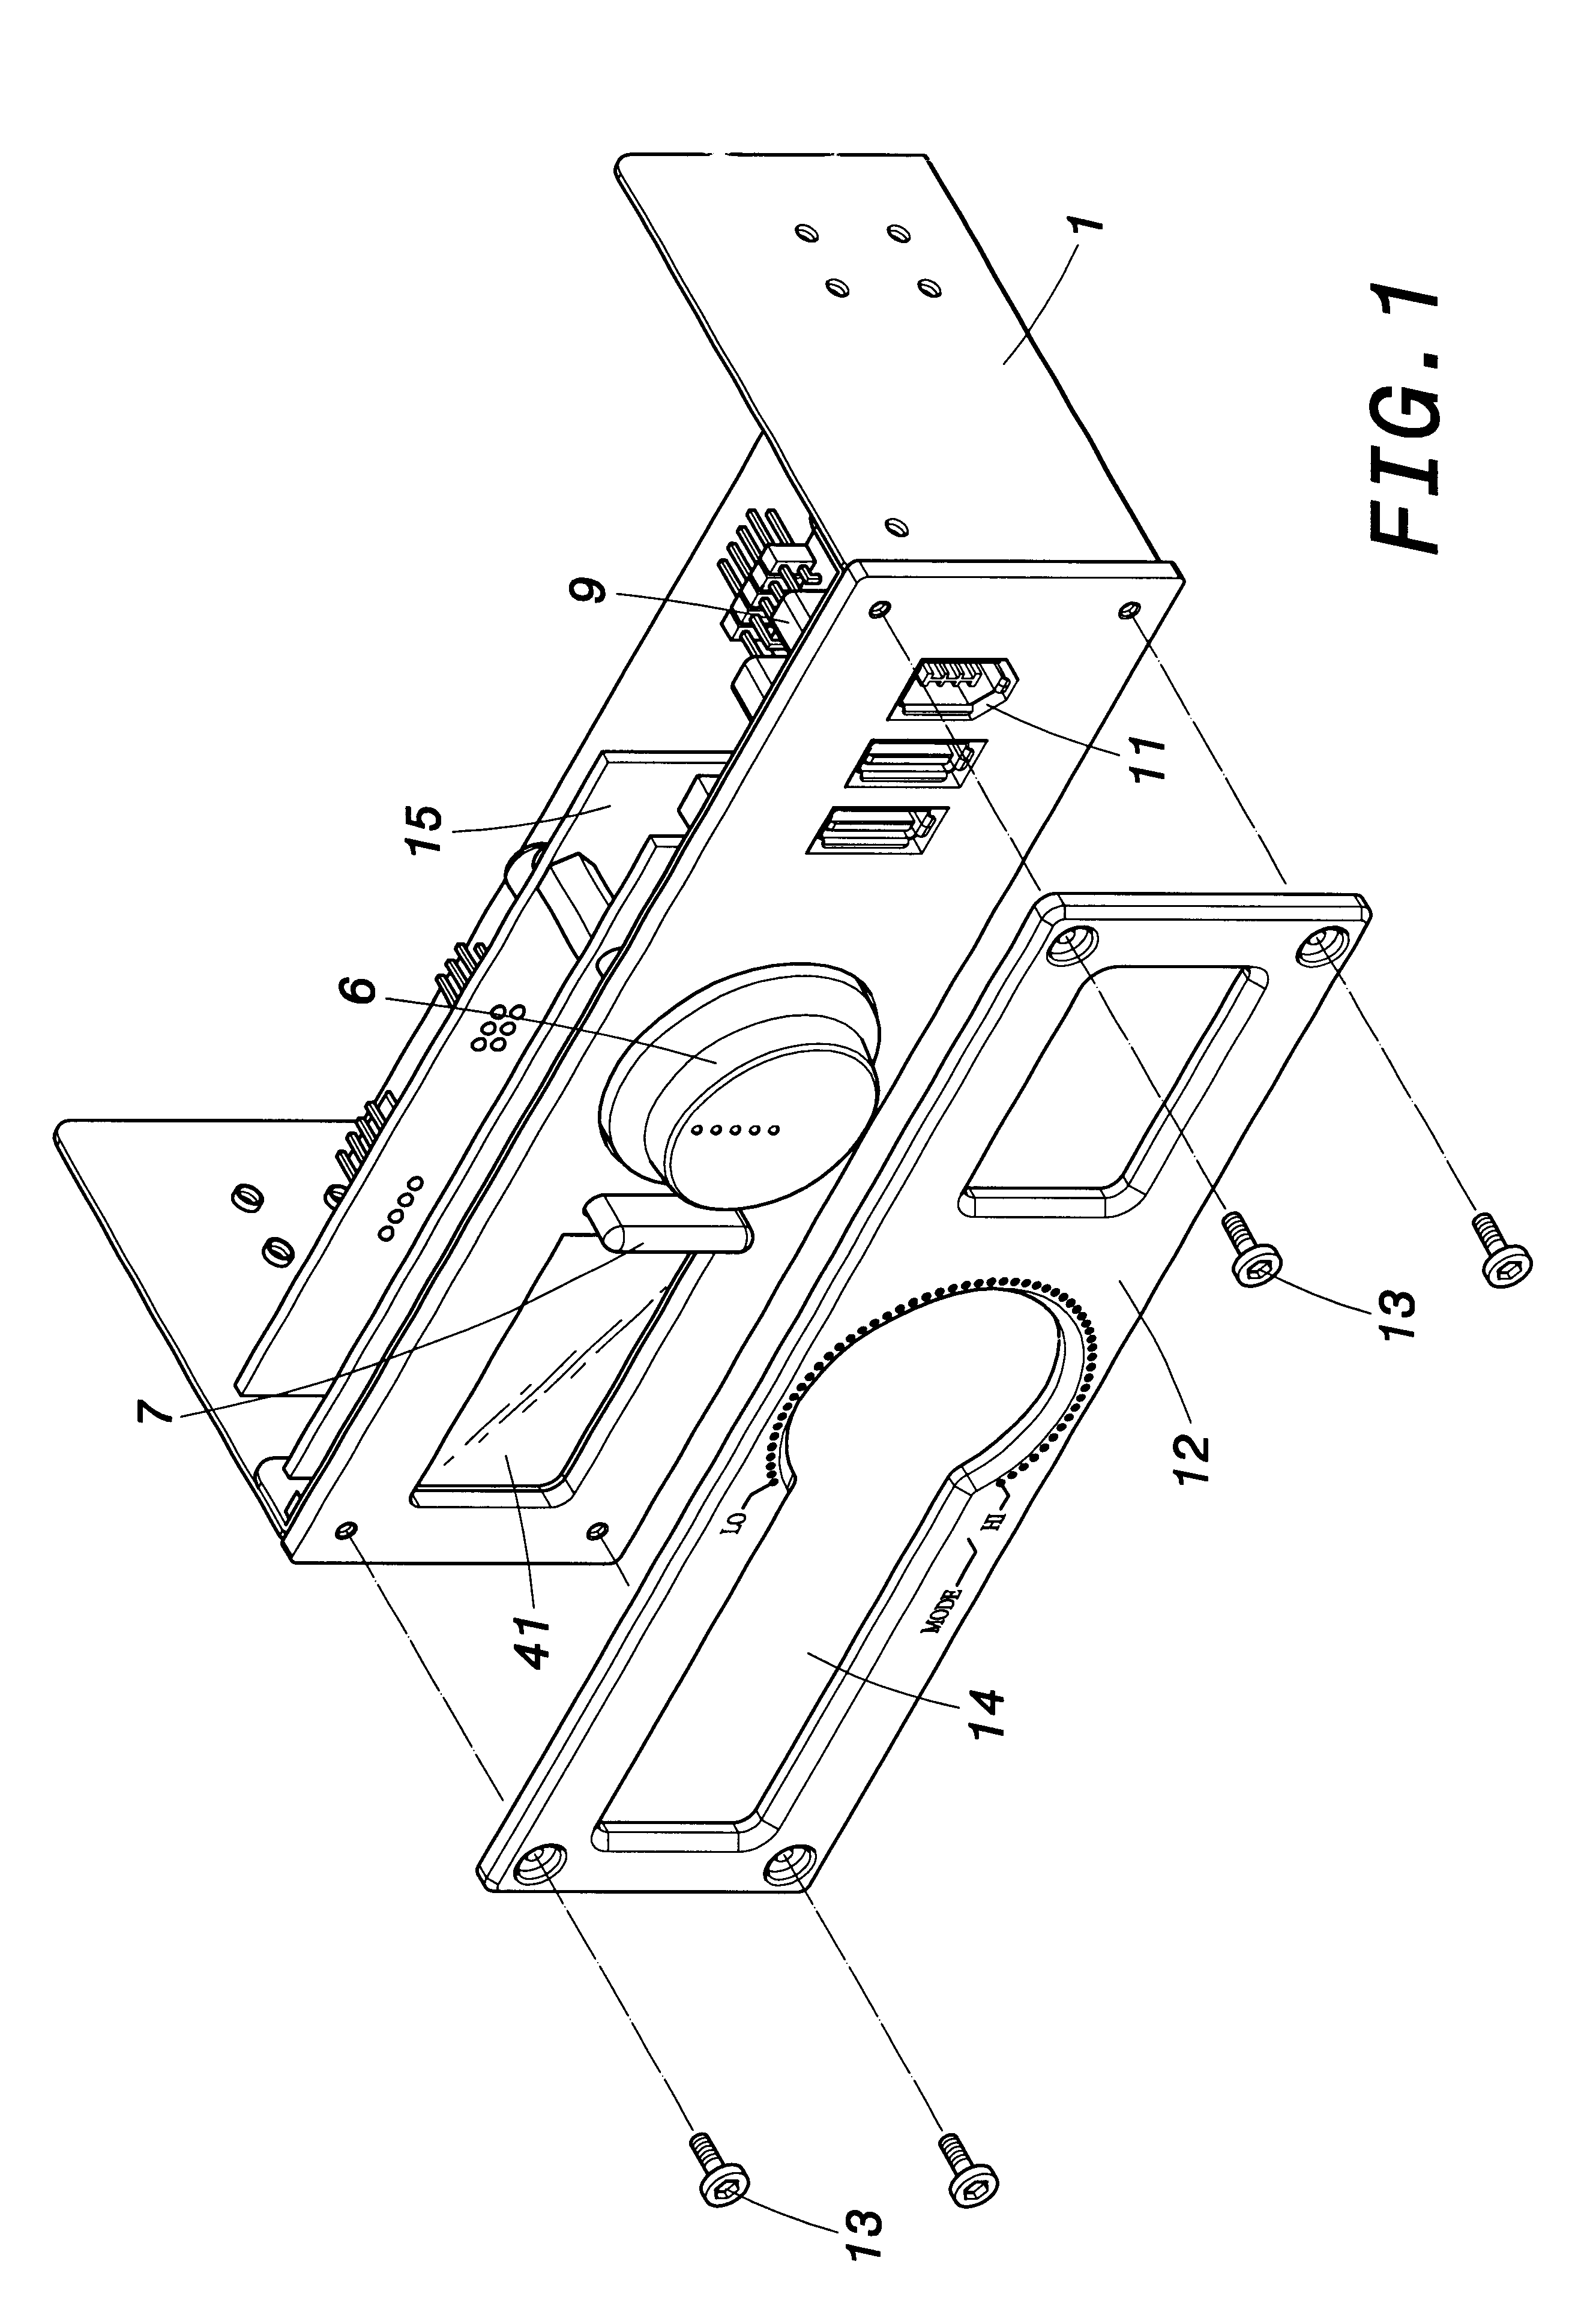 Assembly of computer peripherals